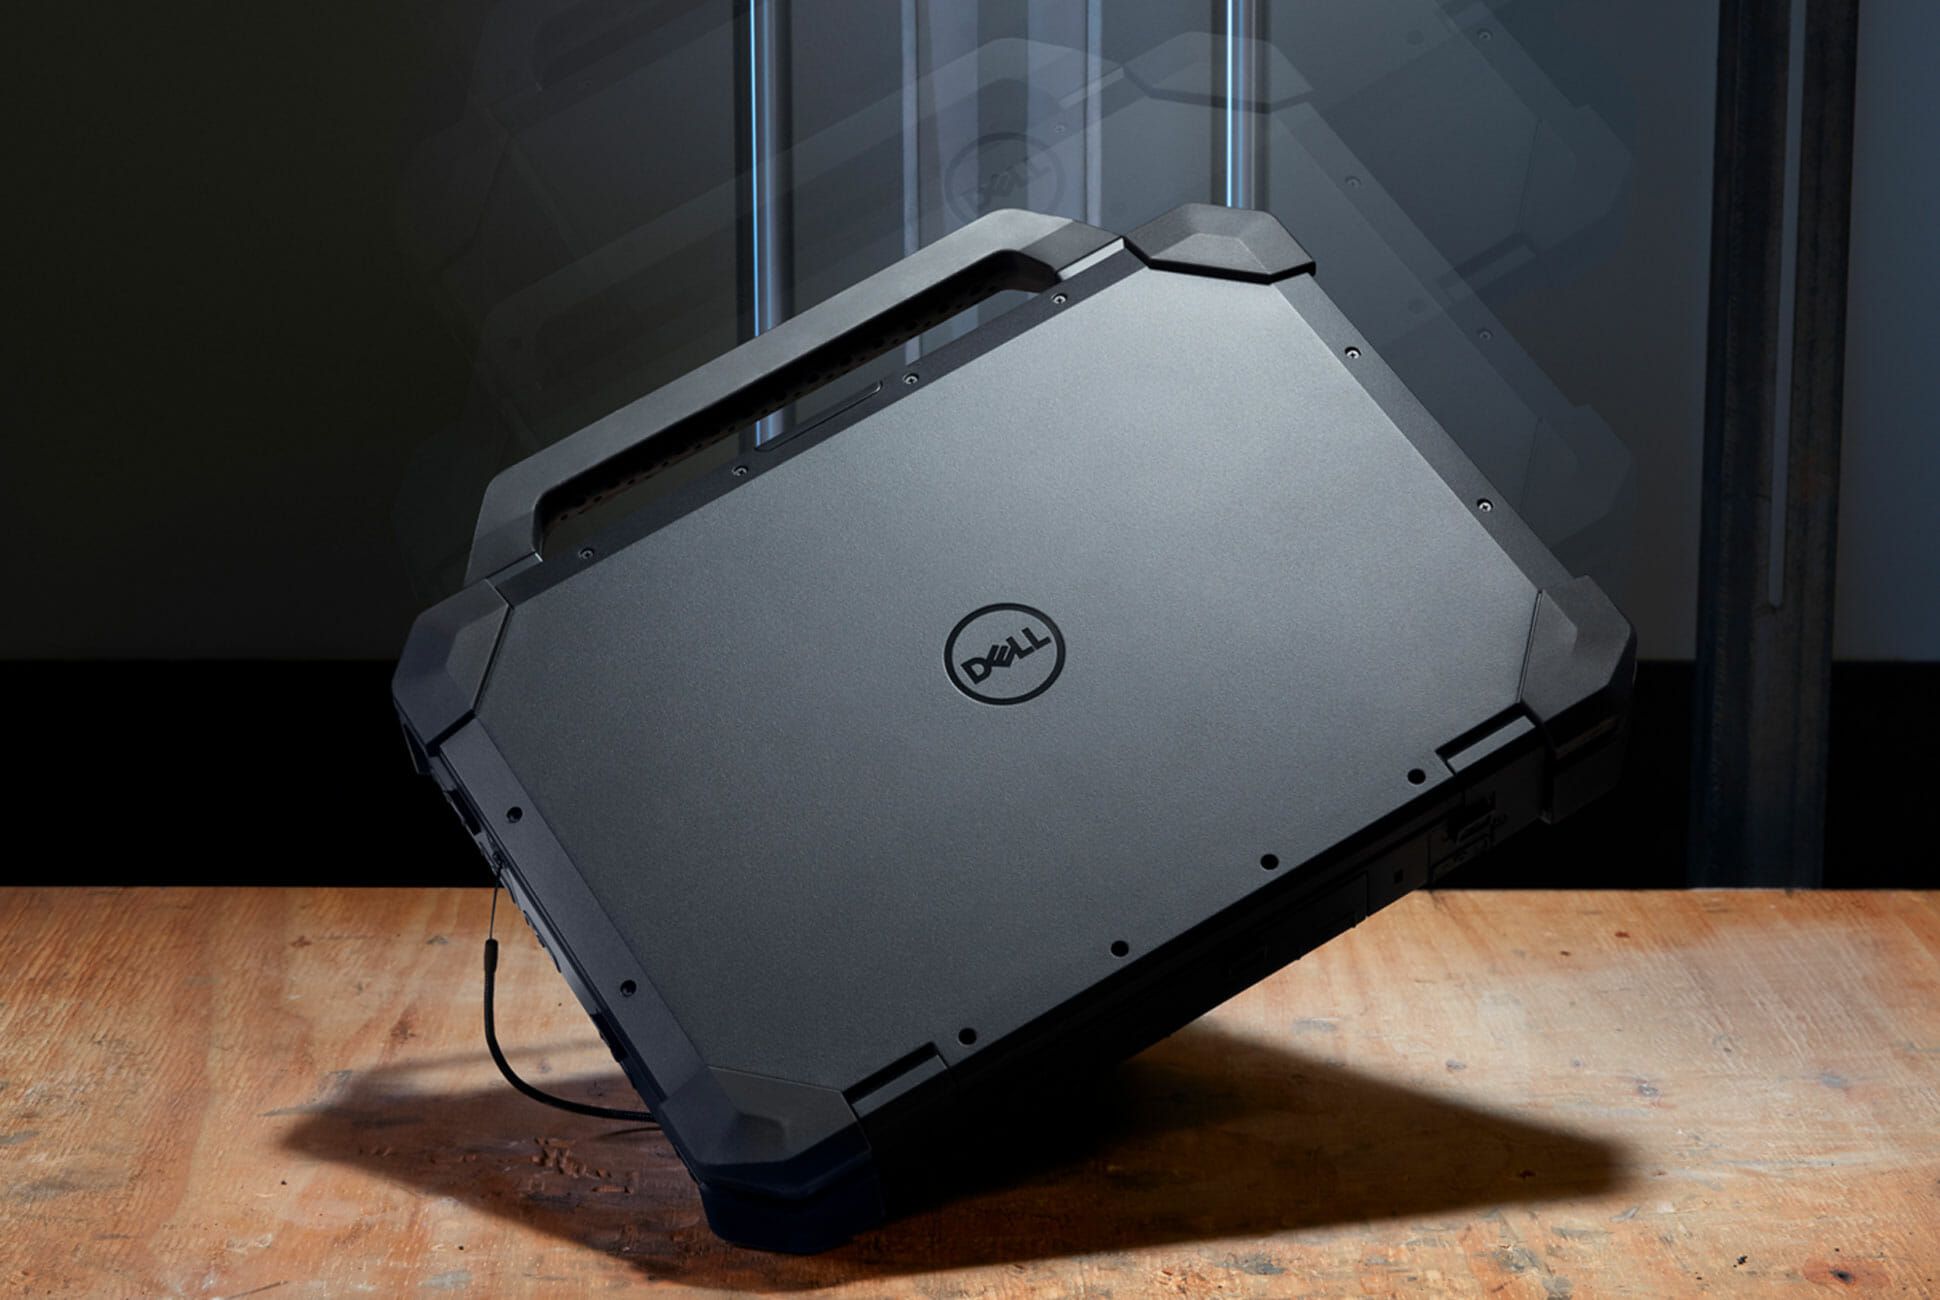 The Best Rugged Laptops That Can Survive the Worst Kinds of Abuse